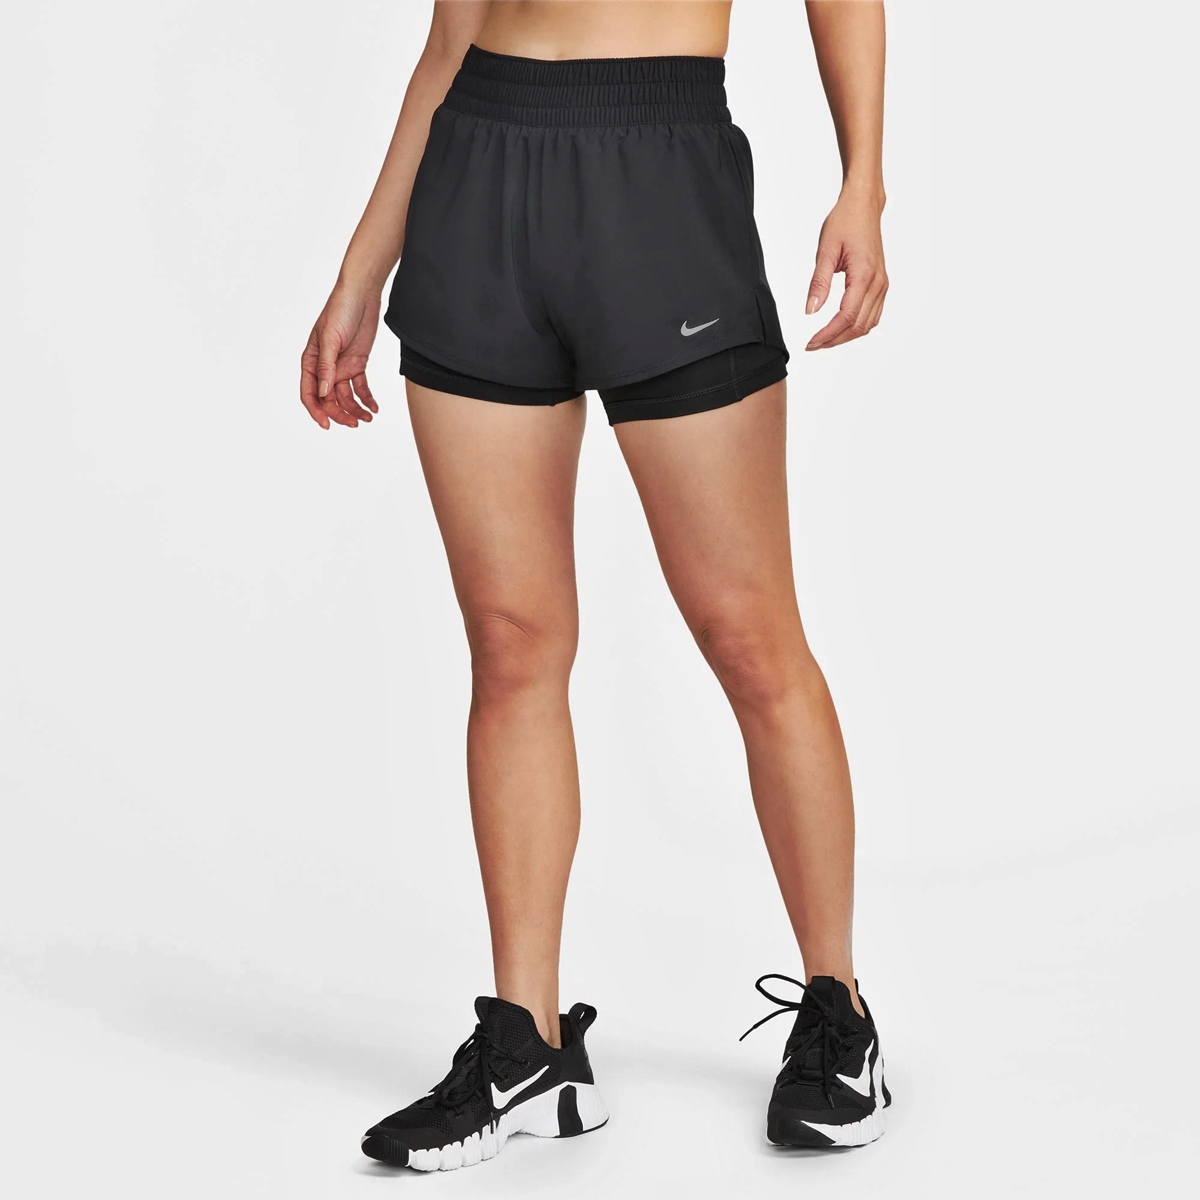 9 Incredible Women’s Jogging Shorts For 2023